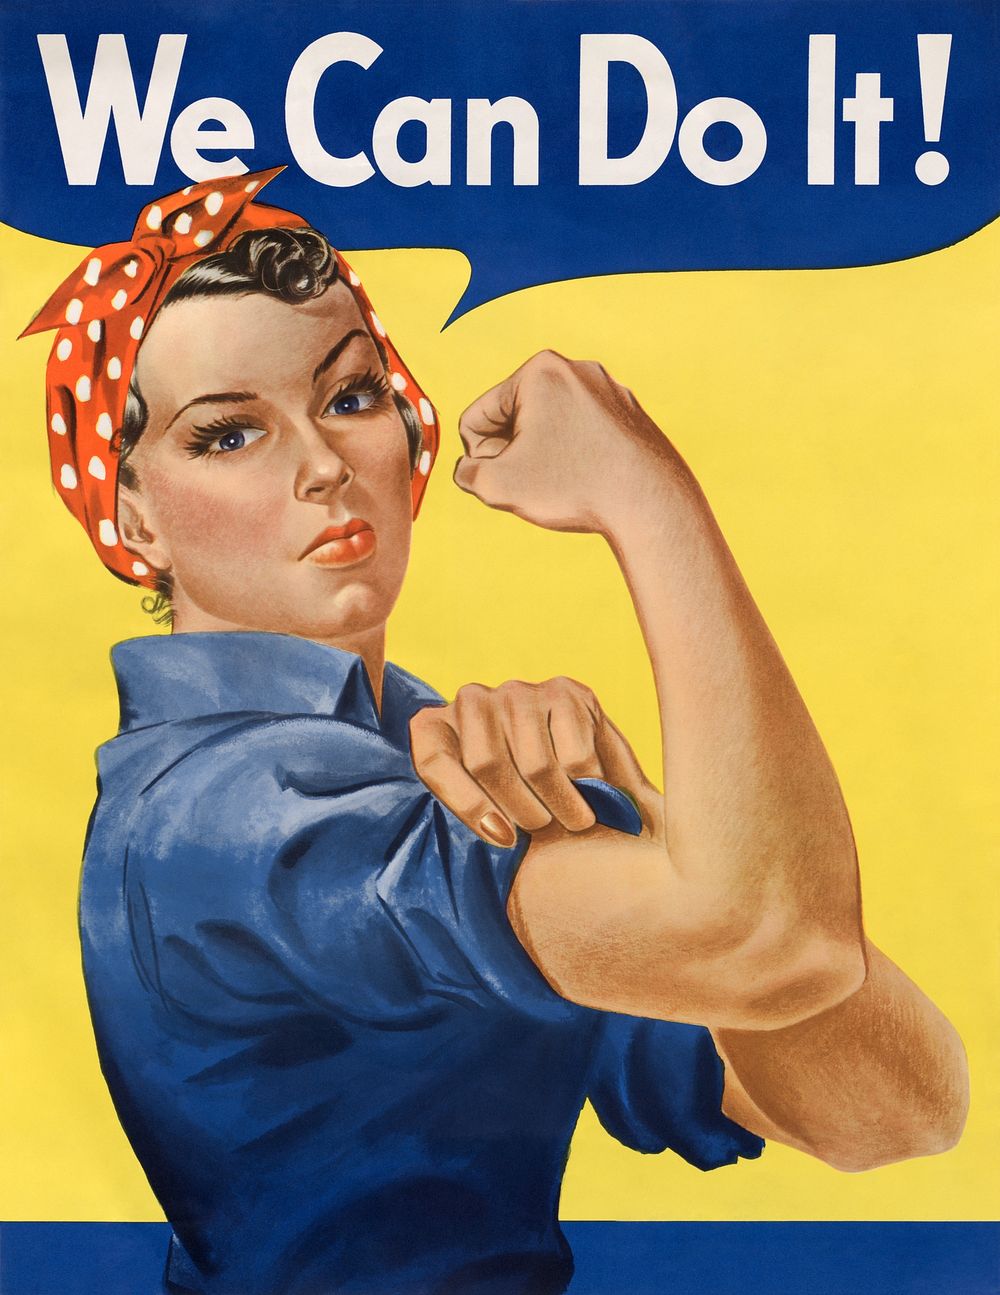 "We Can Do It!", also called "Rosie the Riveter" after the iconic figure of a strong female war production worker (1942…